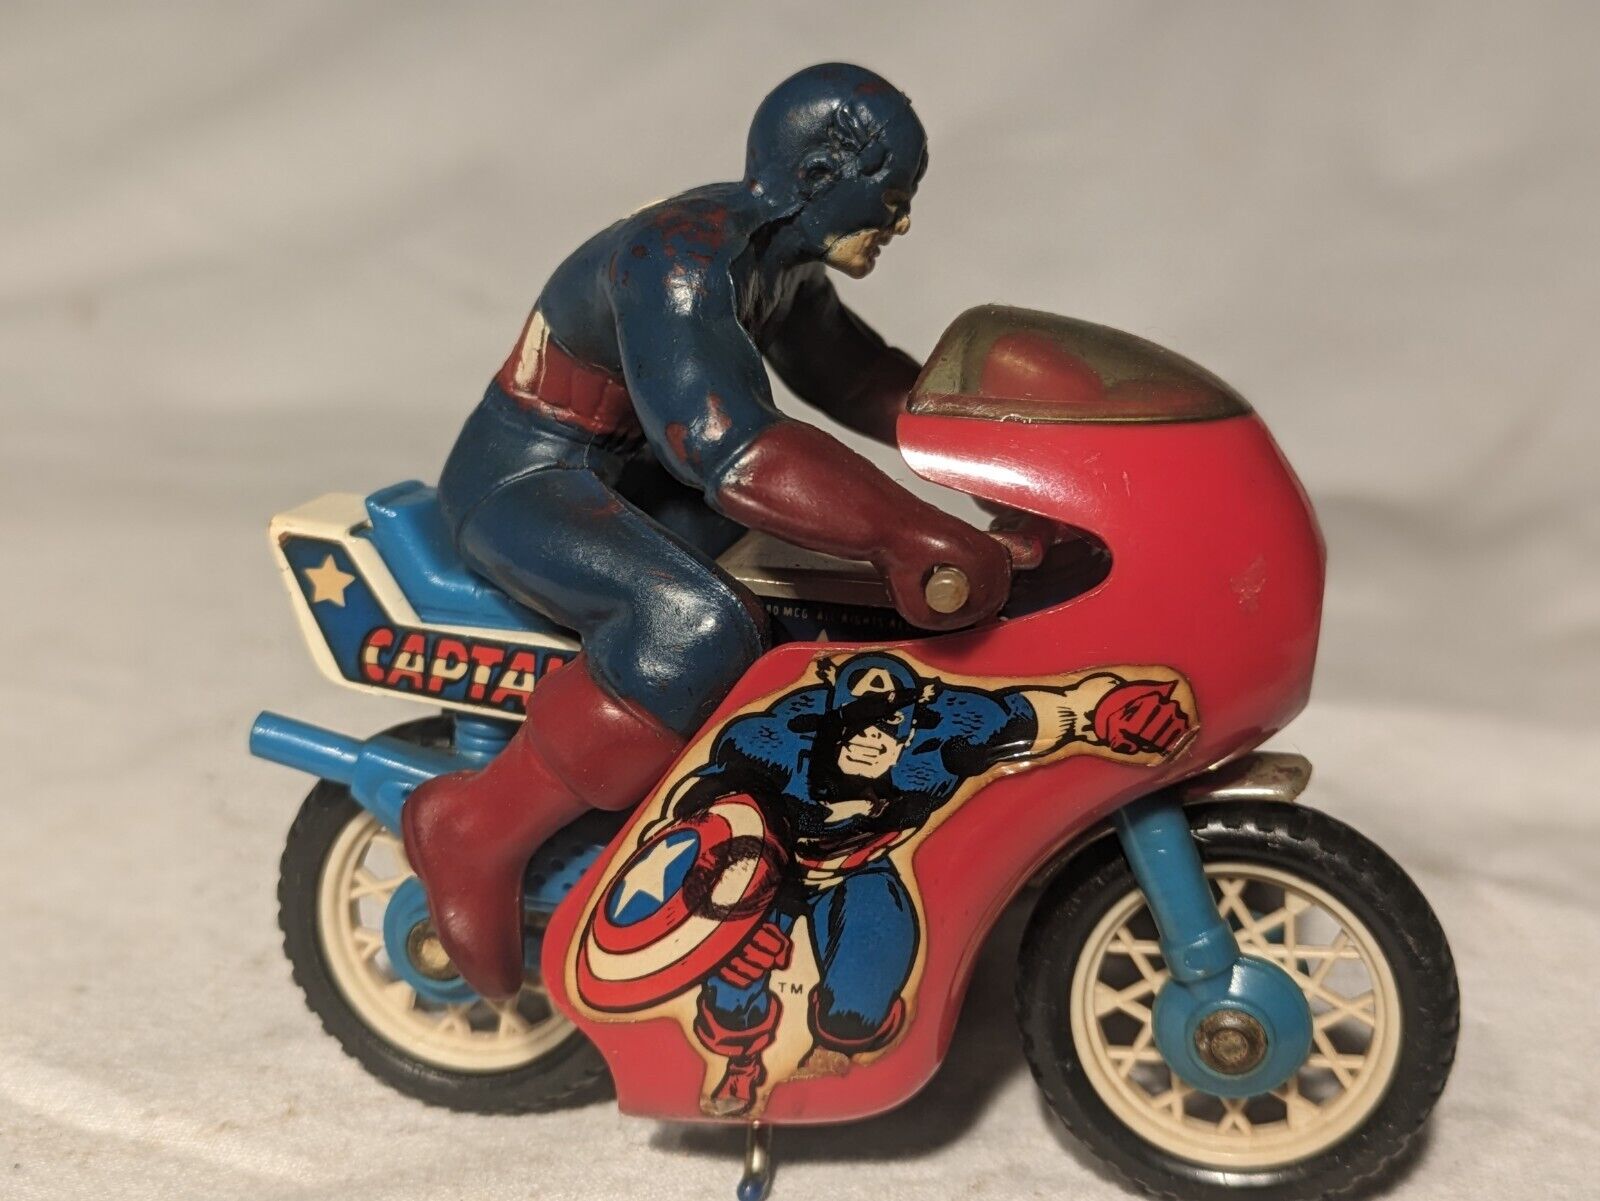 Very Rare Vintage Marvel CAPTAIN AMERICA 1984 Mattel Motorcycle with figurine